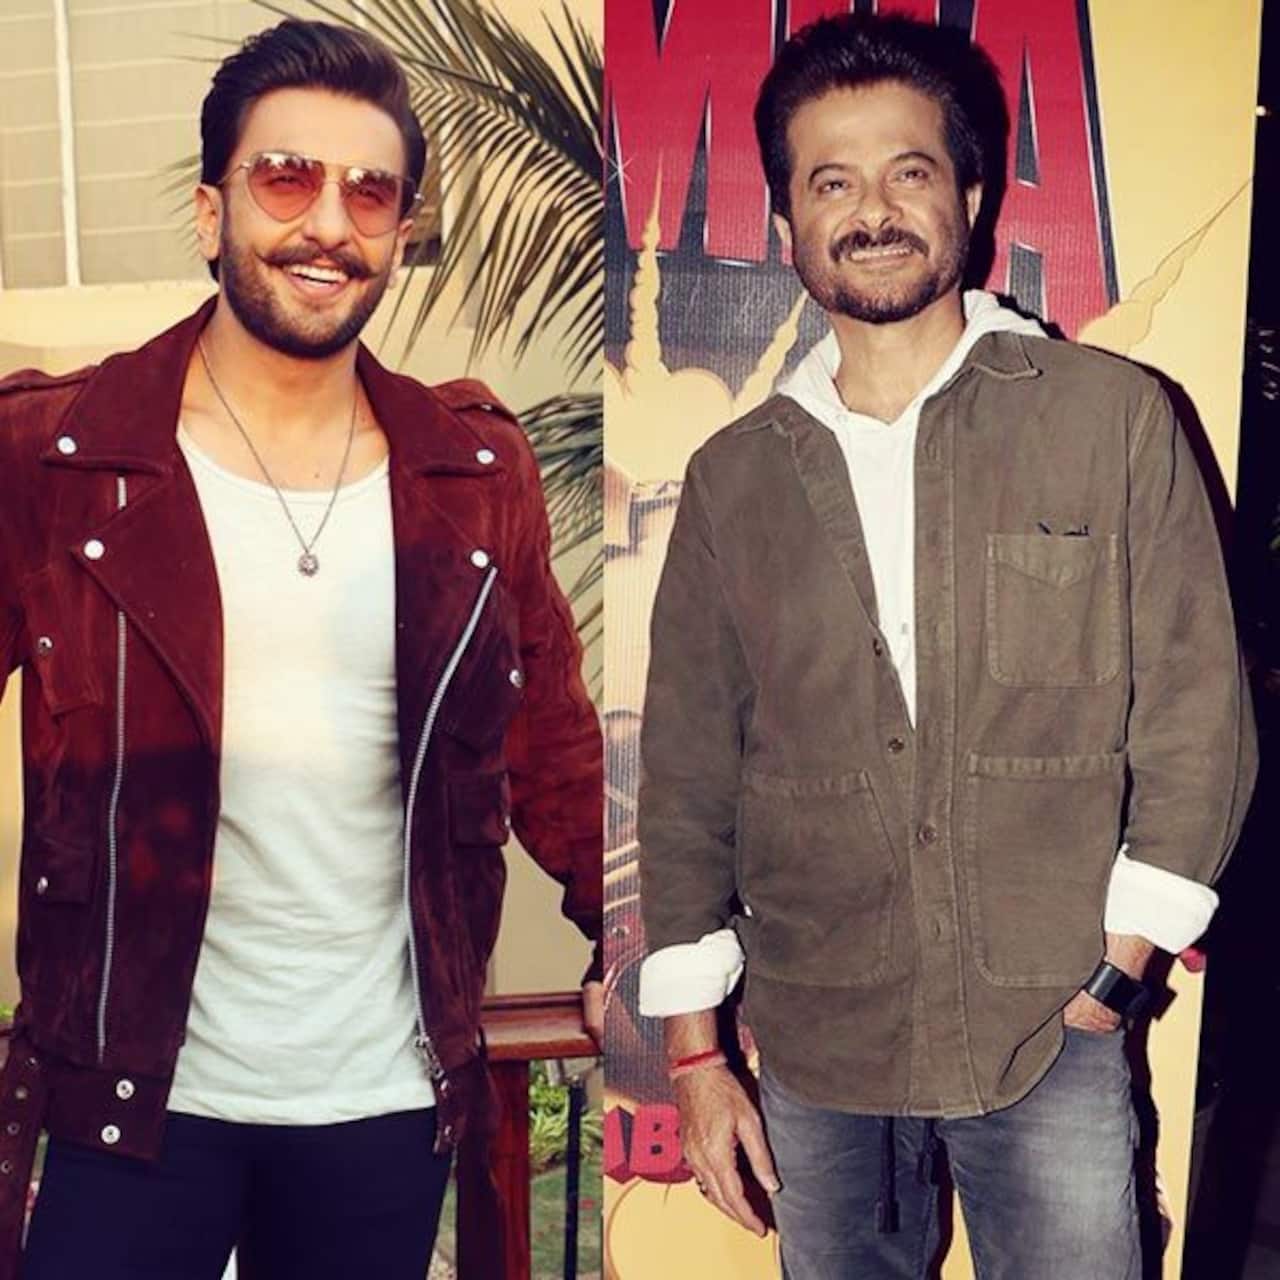 Here’s why Ranveer Singh paid a surprise visit to Anil Kapoor